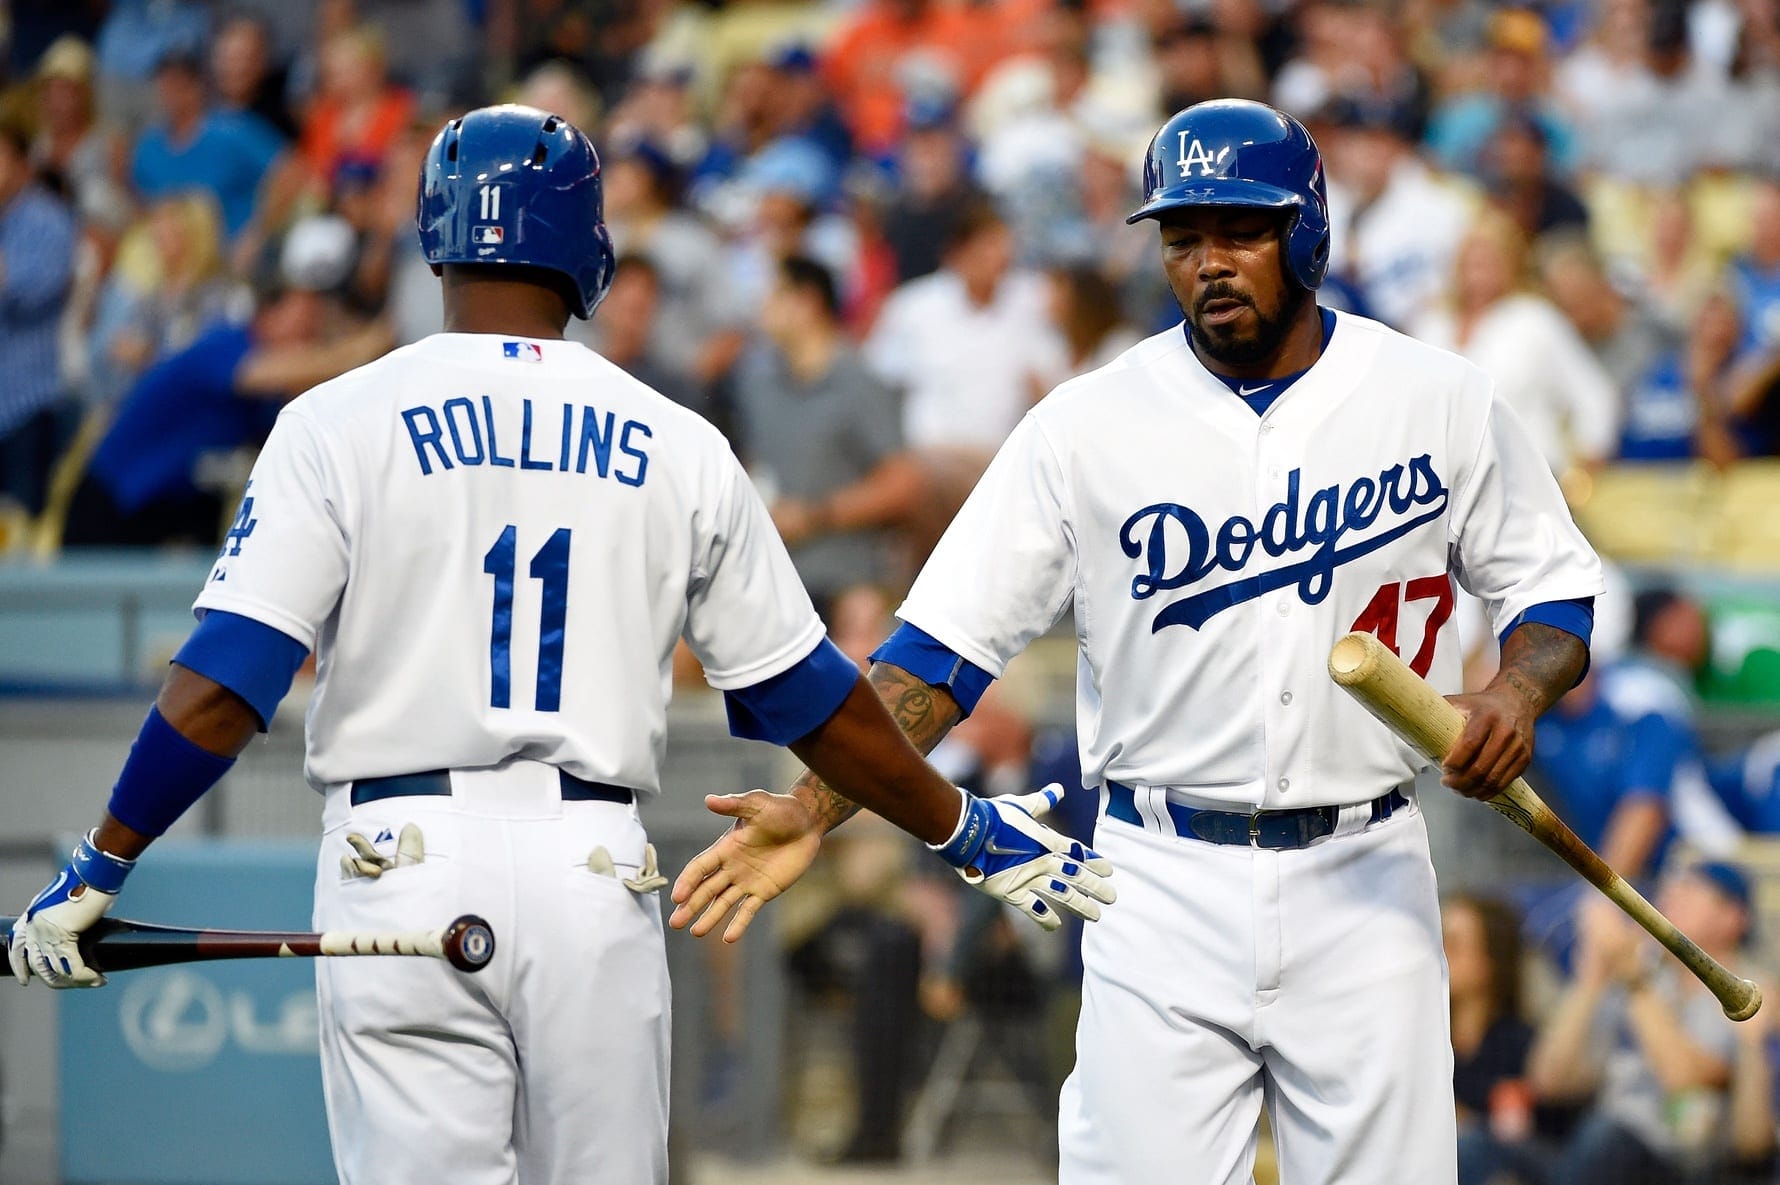 Jimmy Rollins to lead off for Dodgers this season